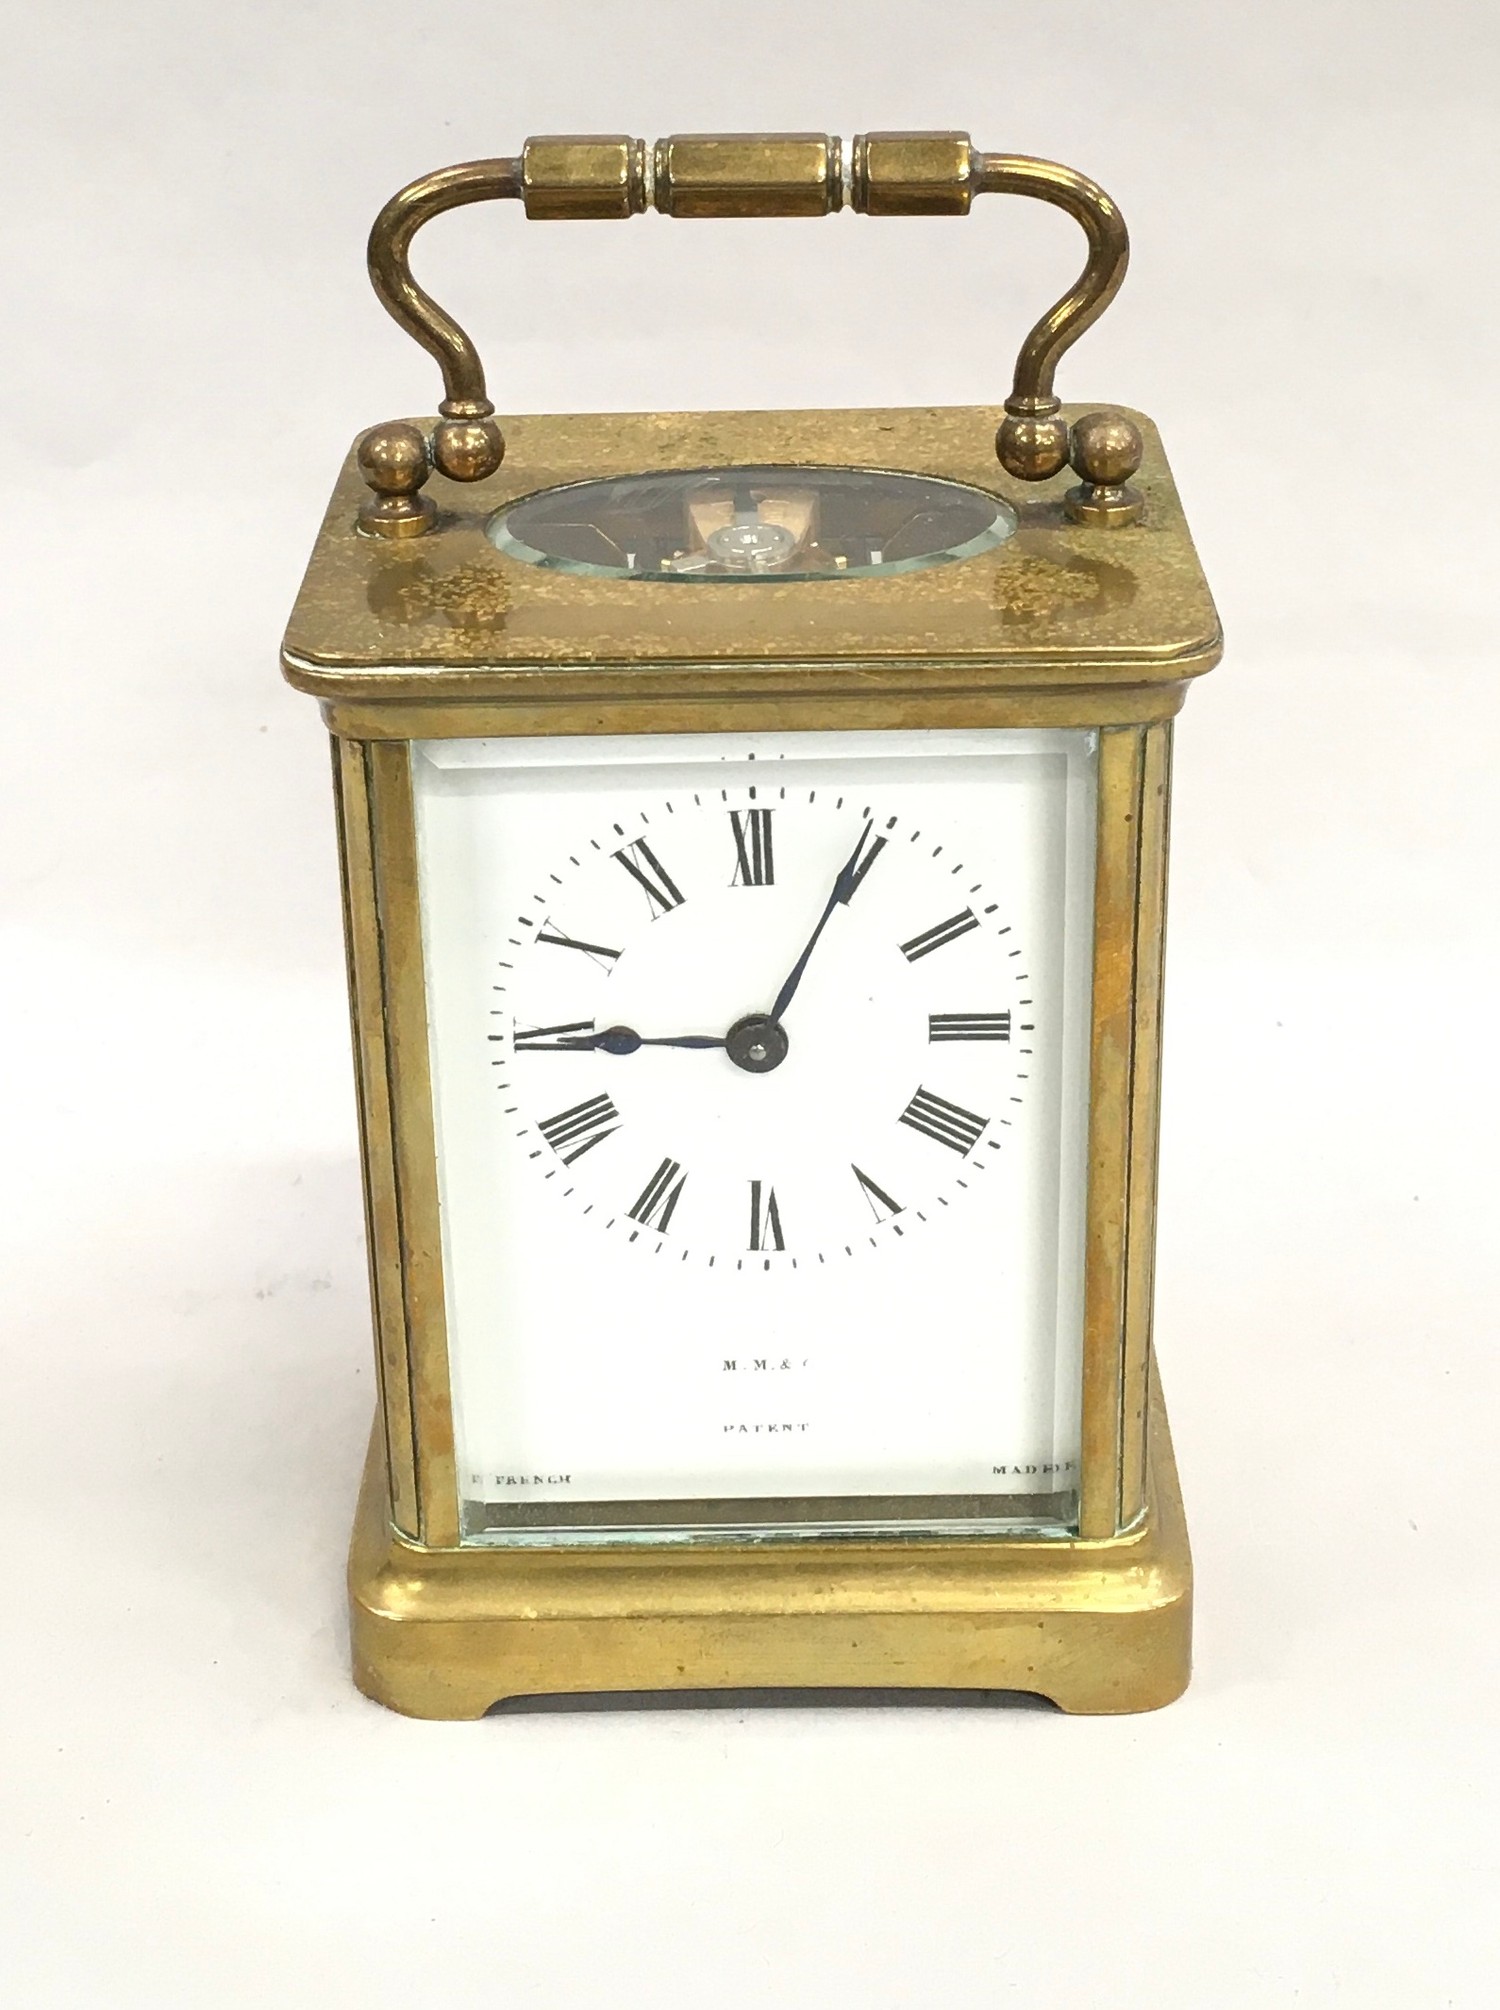 Brass cased carriage clock with key marked M.M.C France working